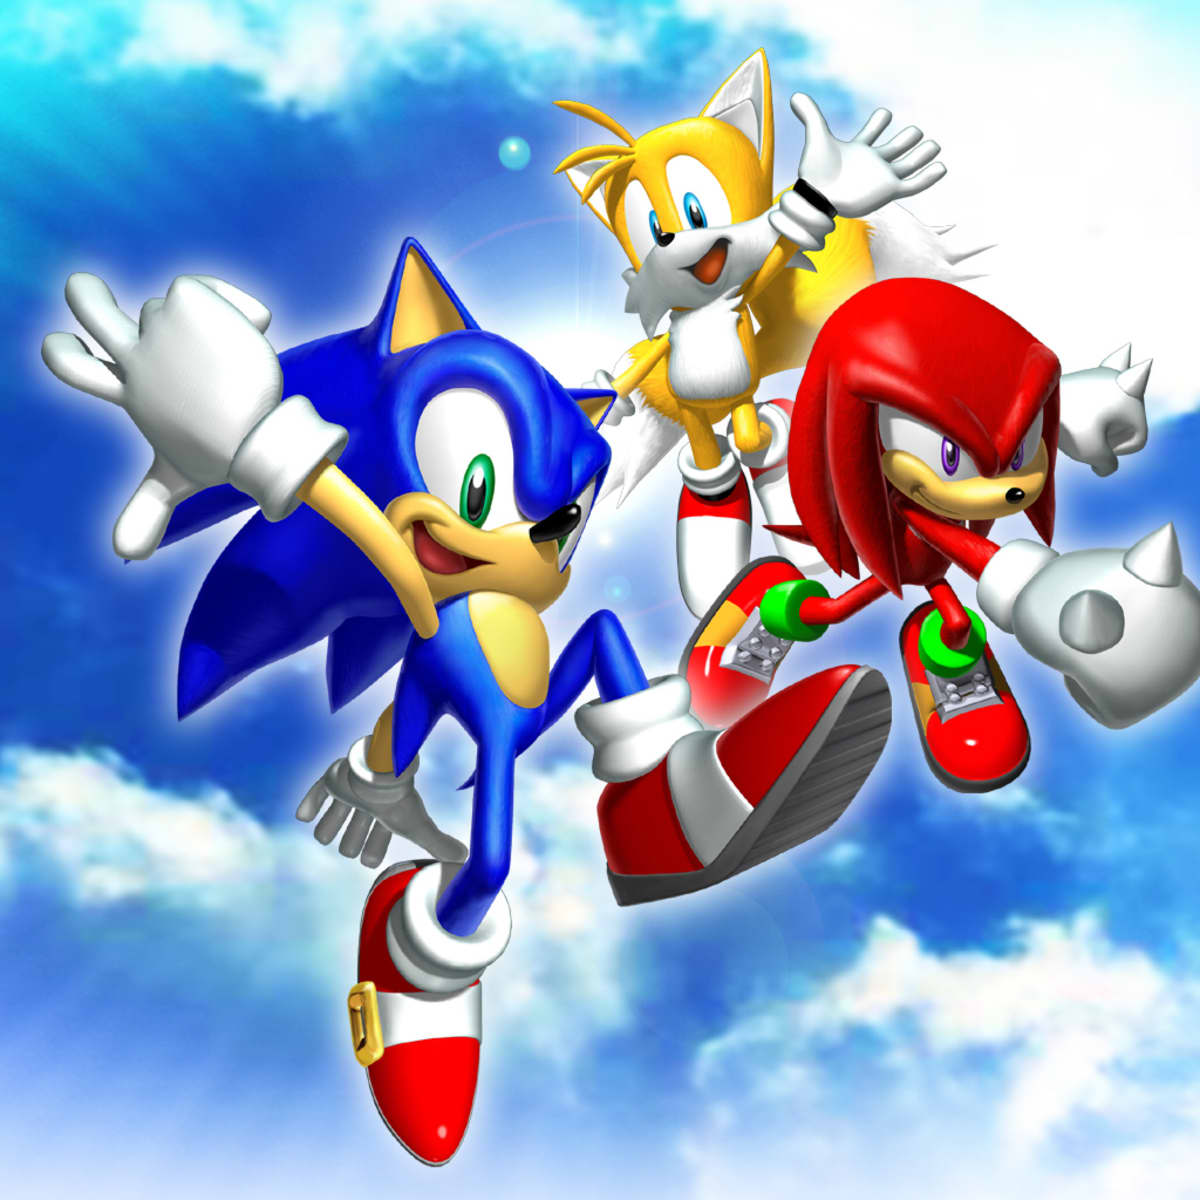 Sonic the Hedgehog collaboration with Phantasy Star Online 2 New Genesis  announced - Tails' Channel